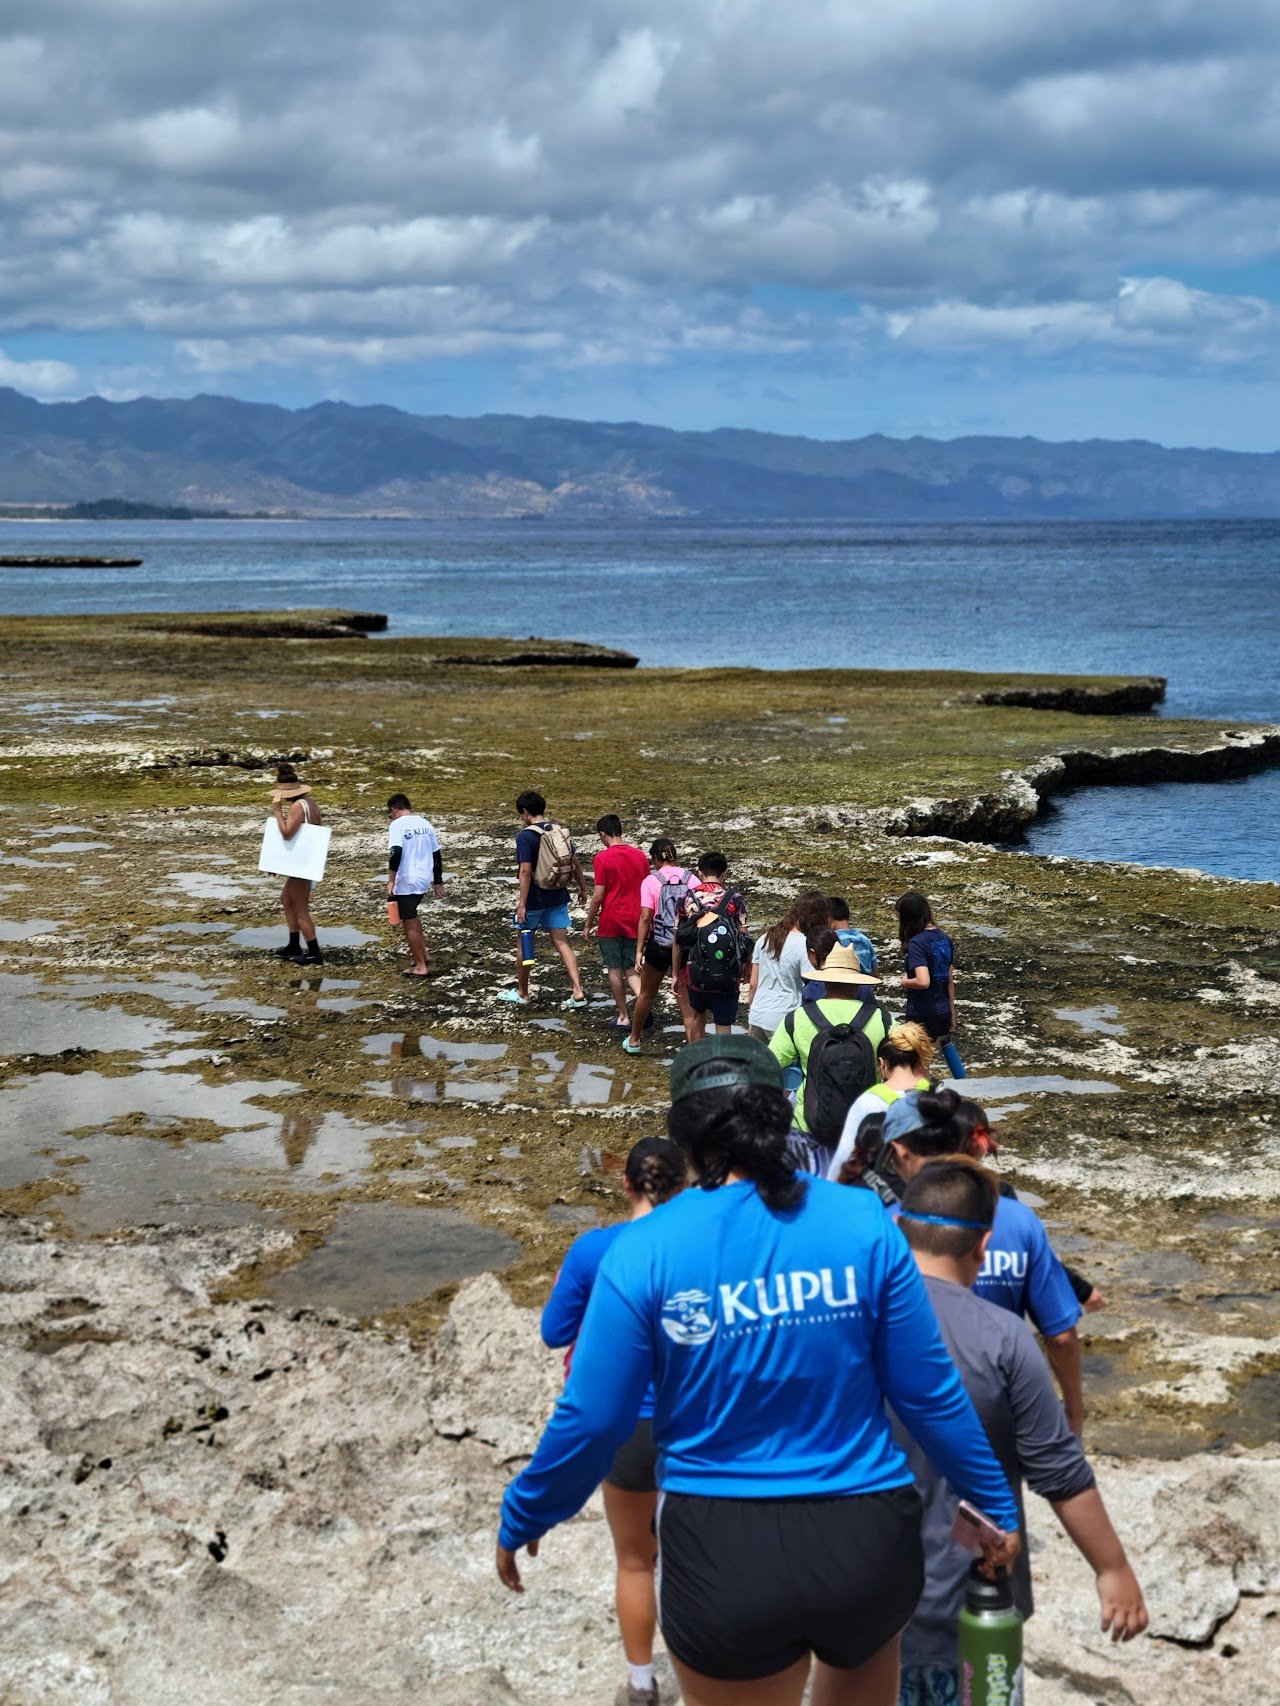 Kupu participants walking along the coastline, engaged in the removal of invasive species.